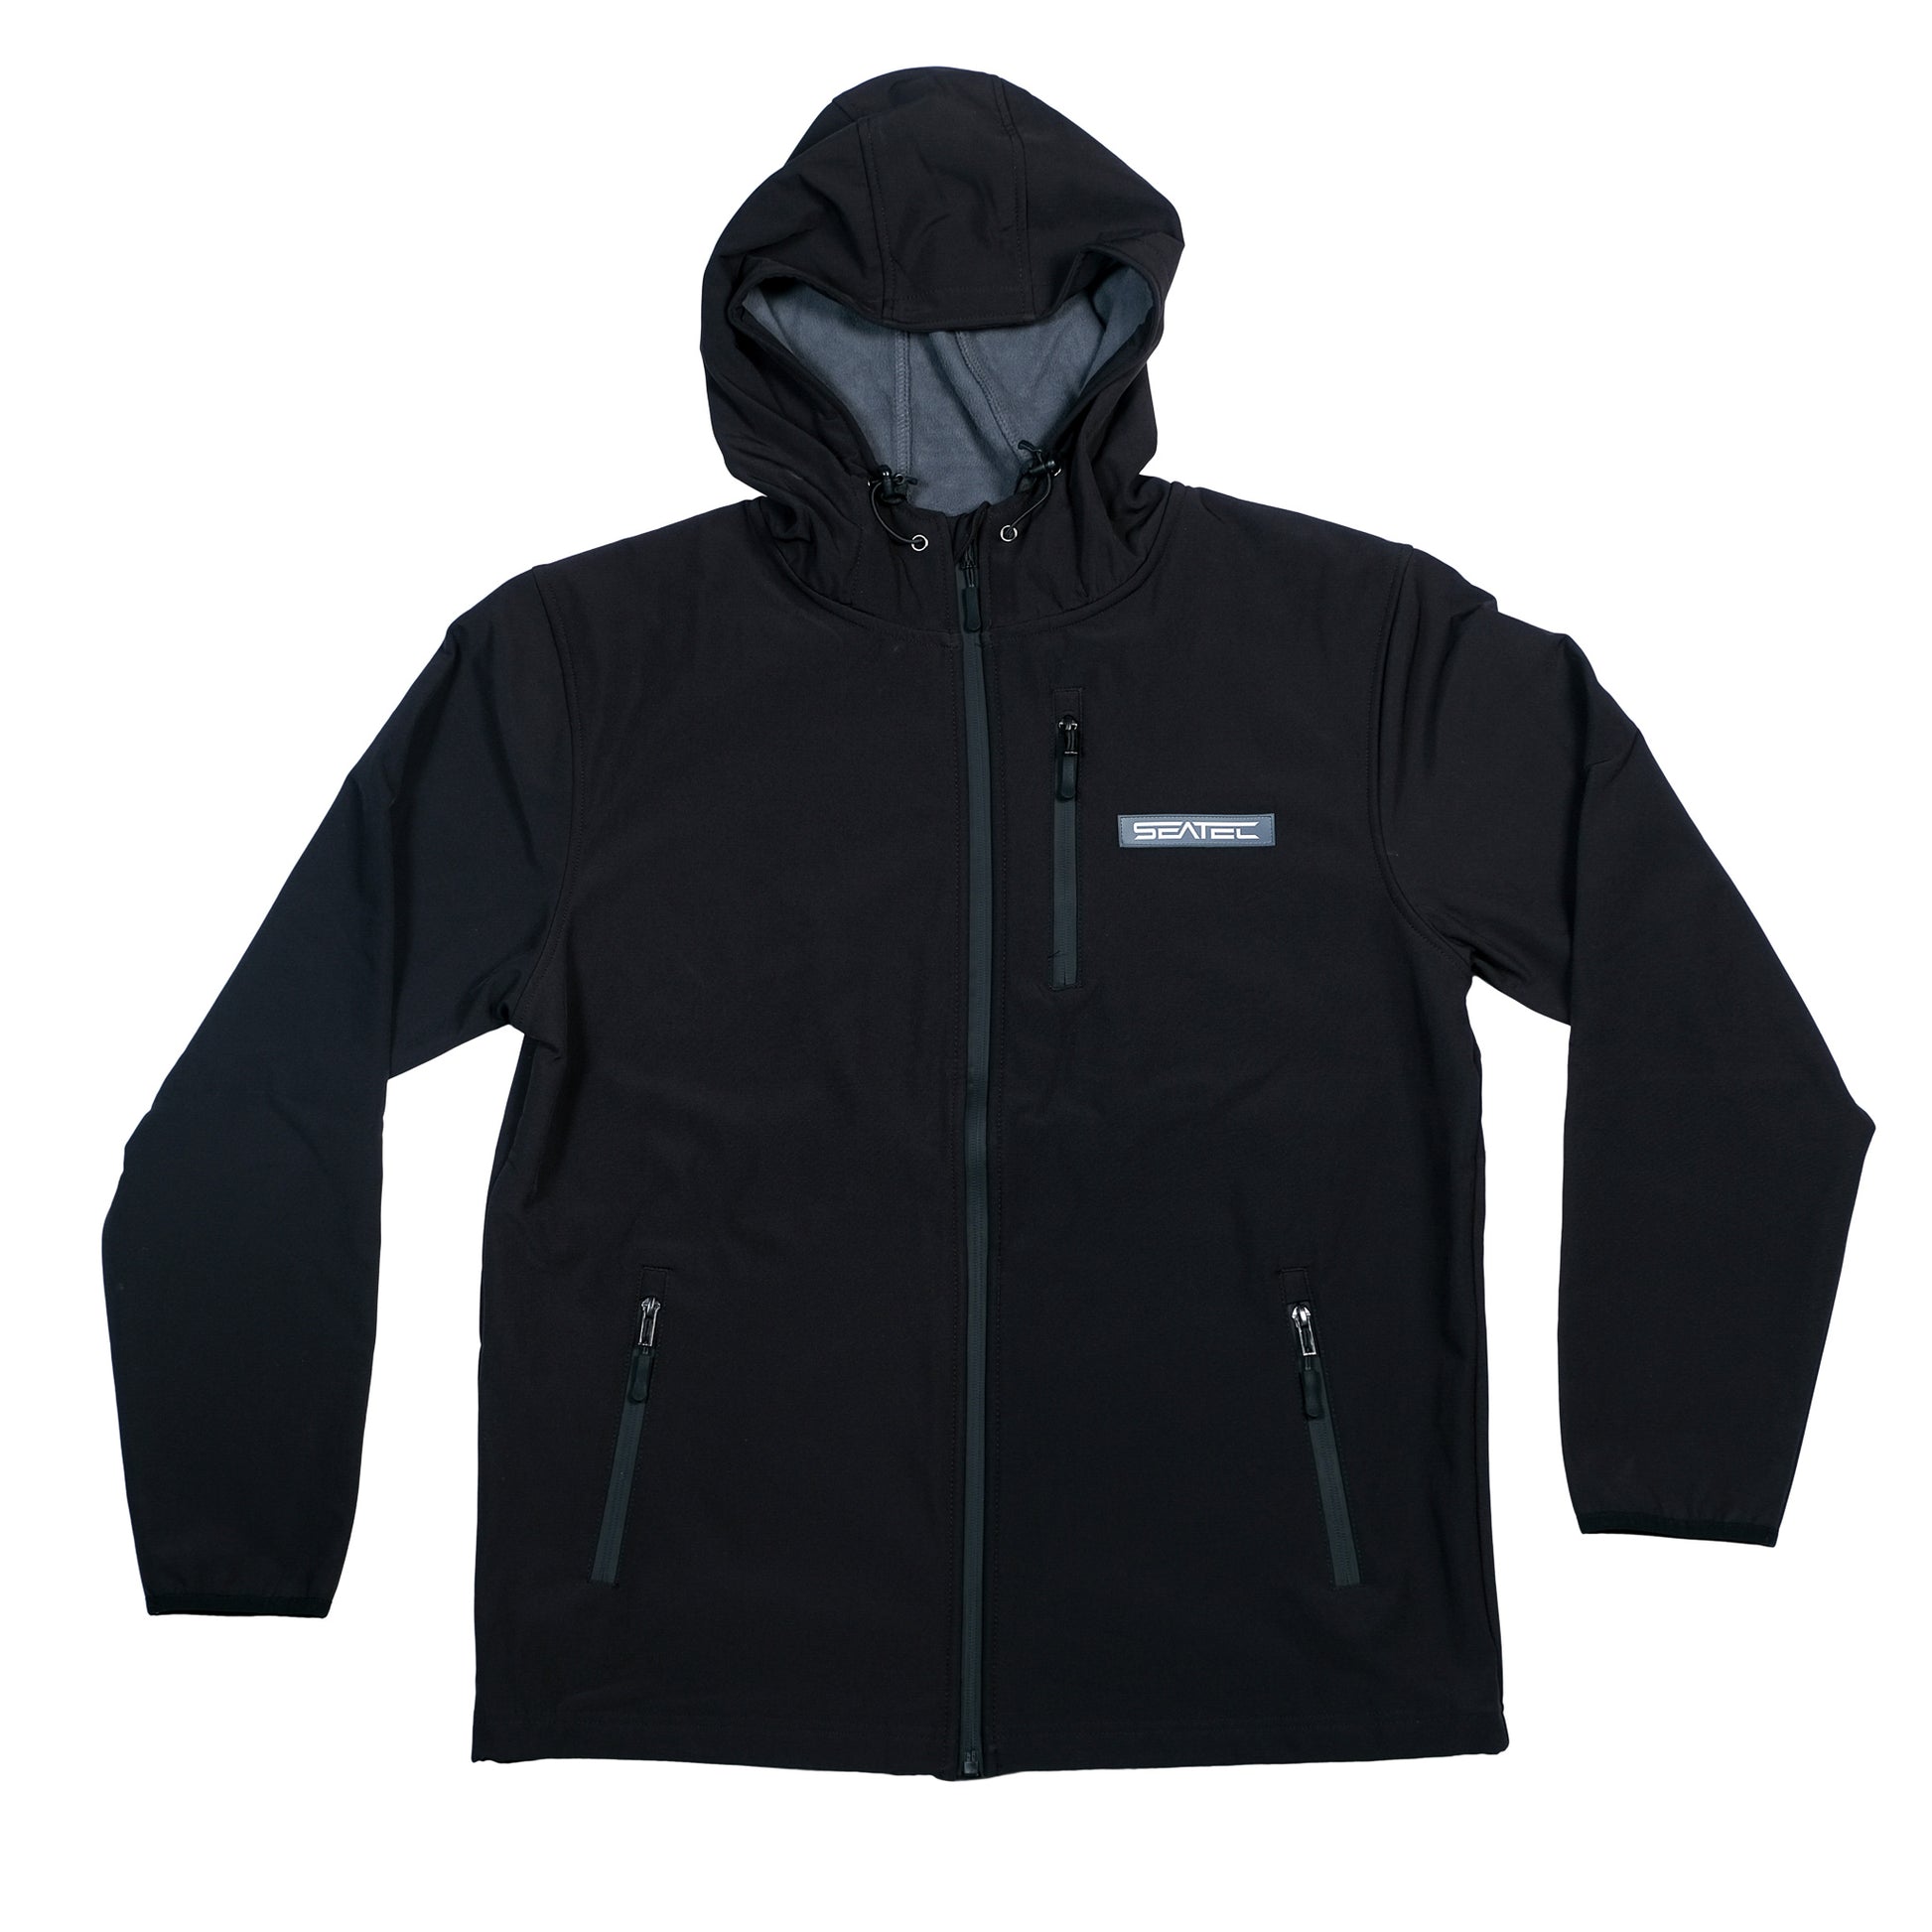 poly tec soft shell jacket for men